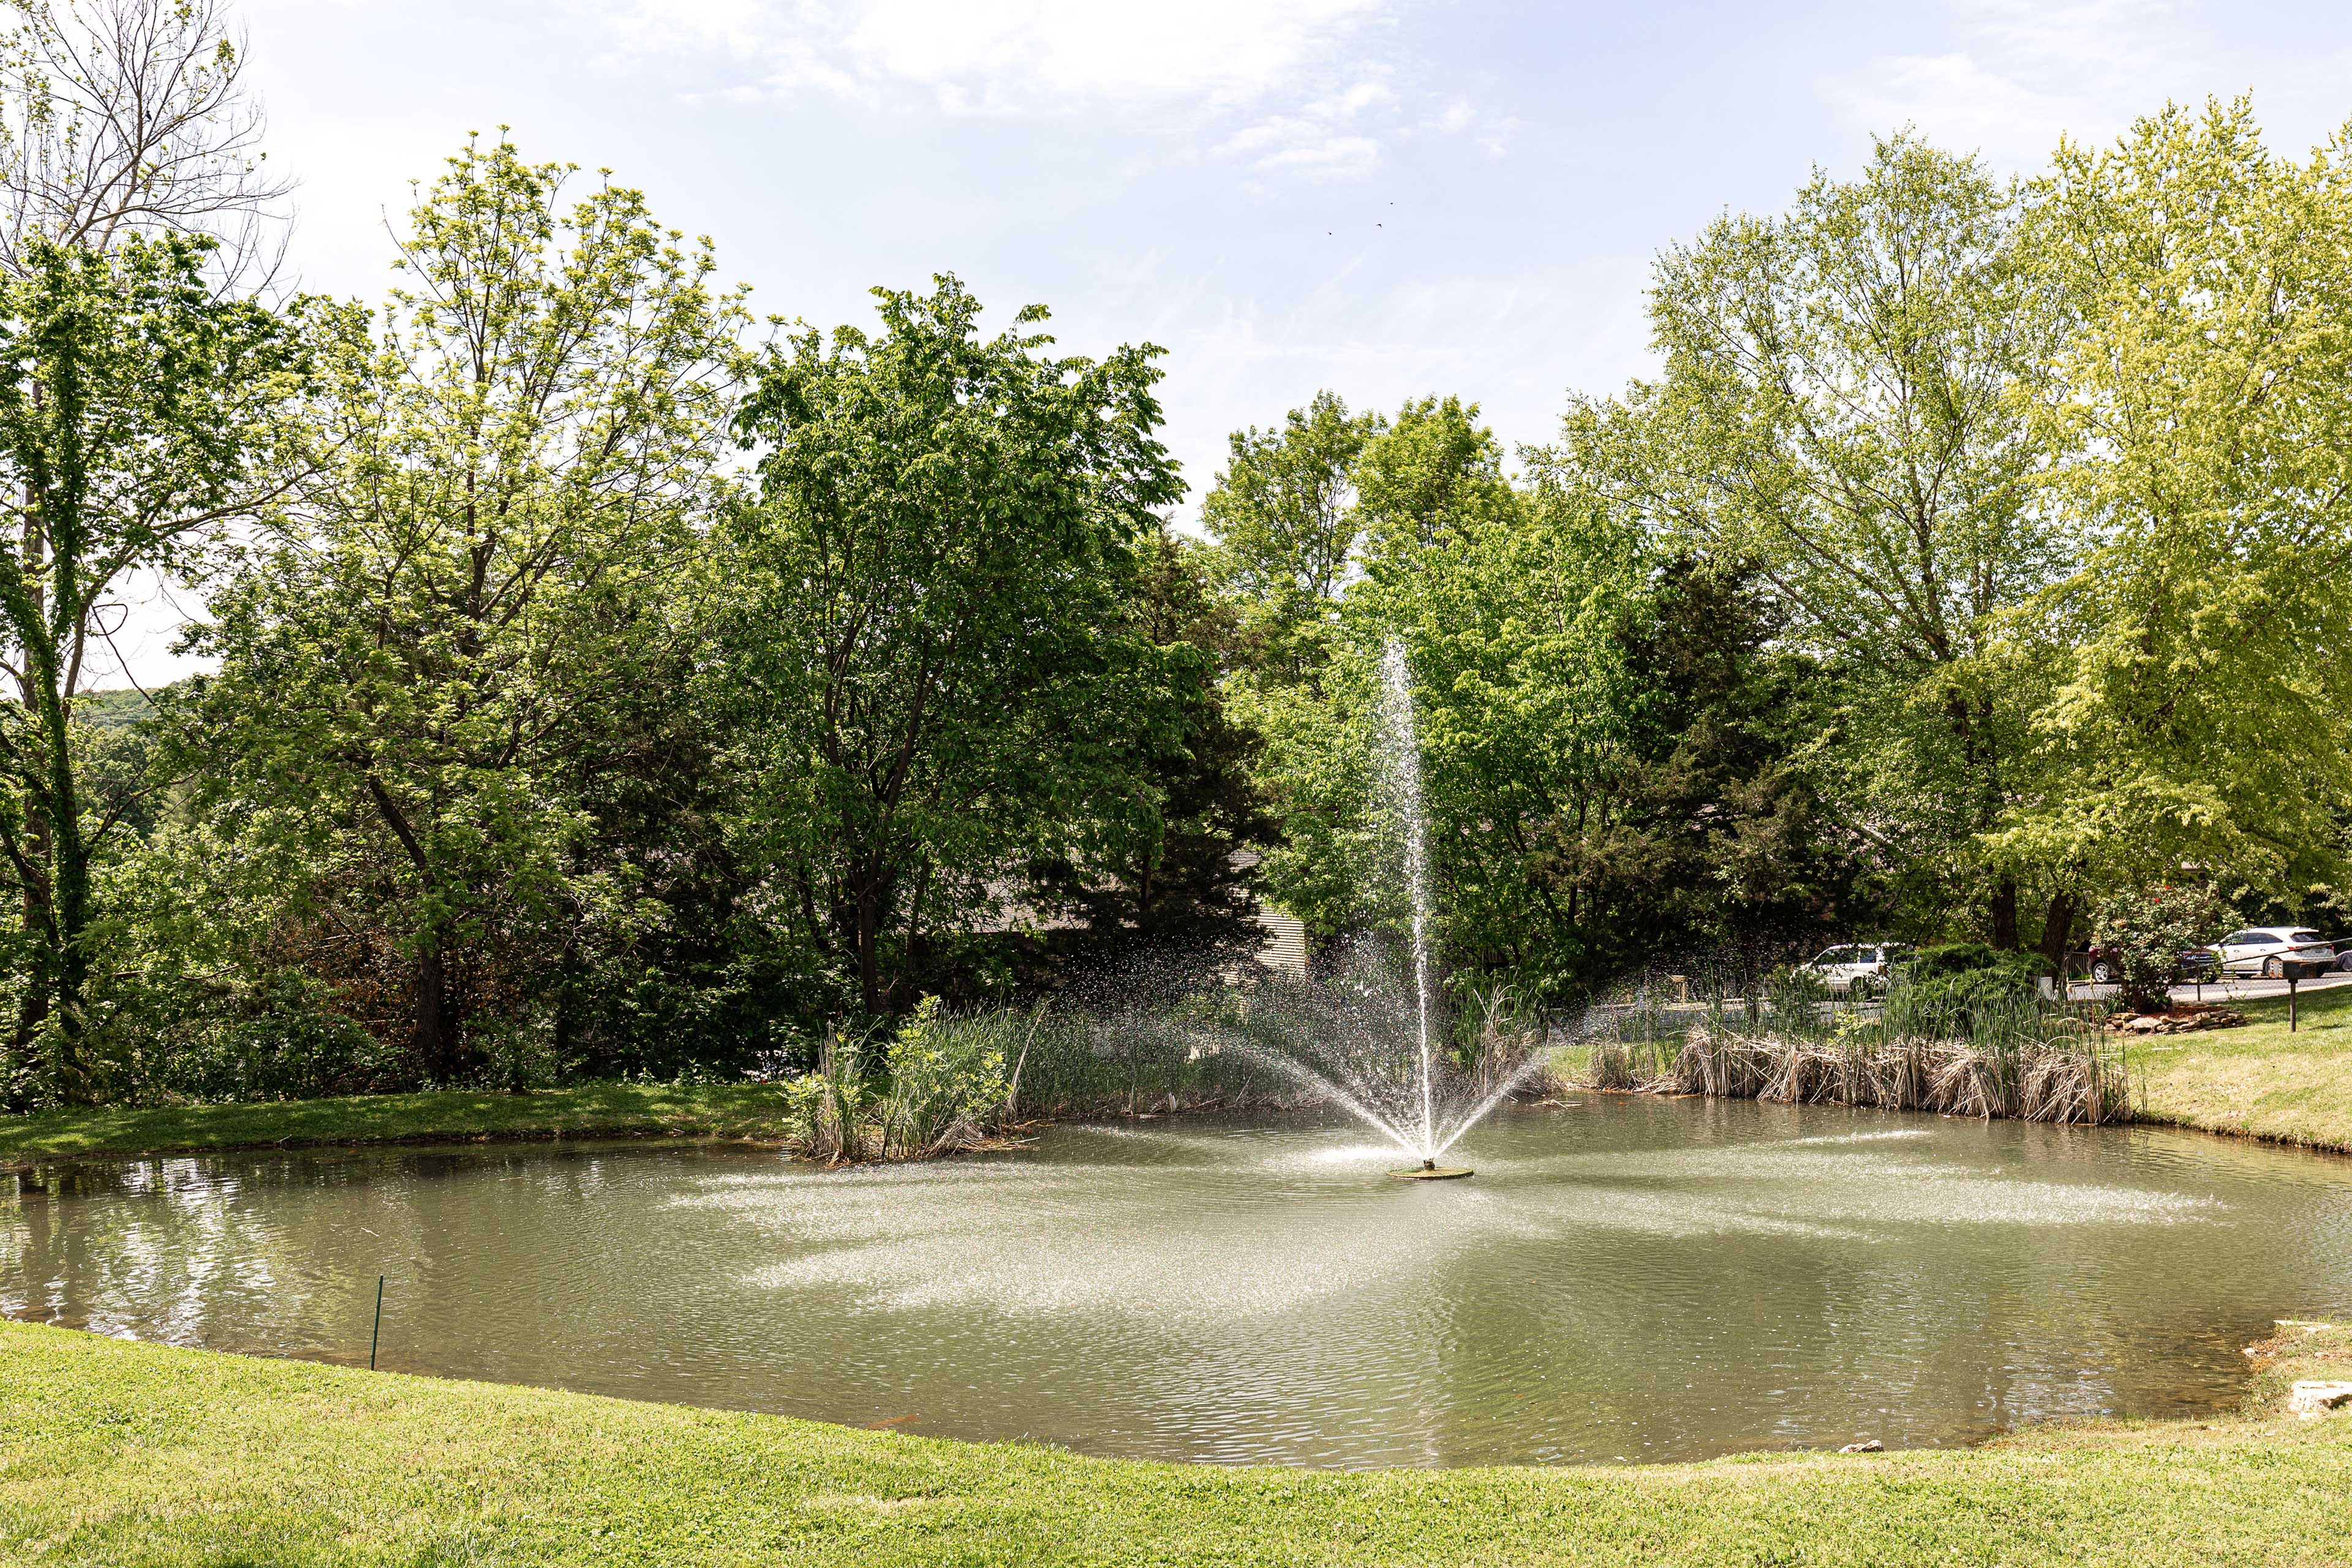 You'll love the views of the pond with a fountain.